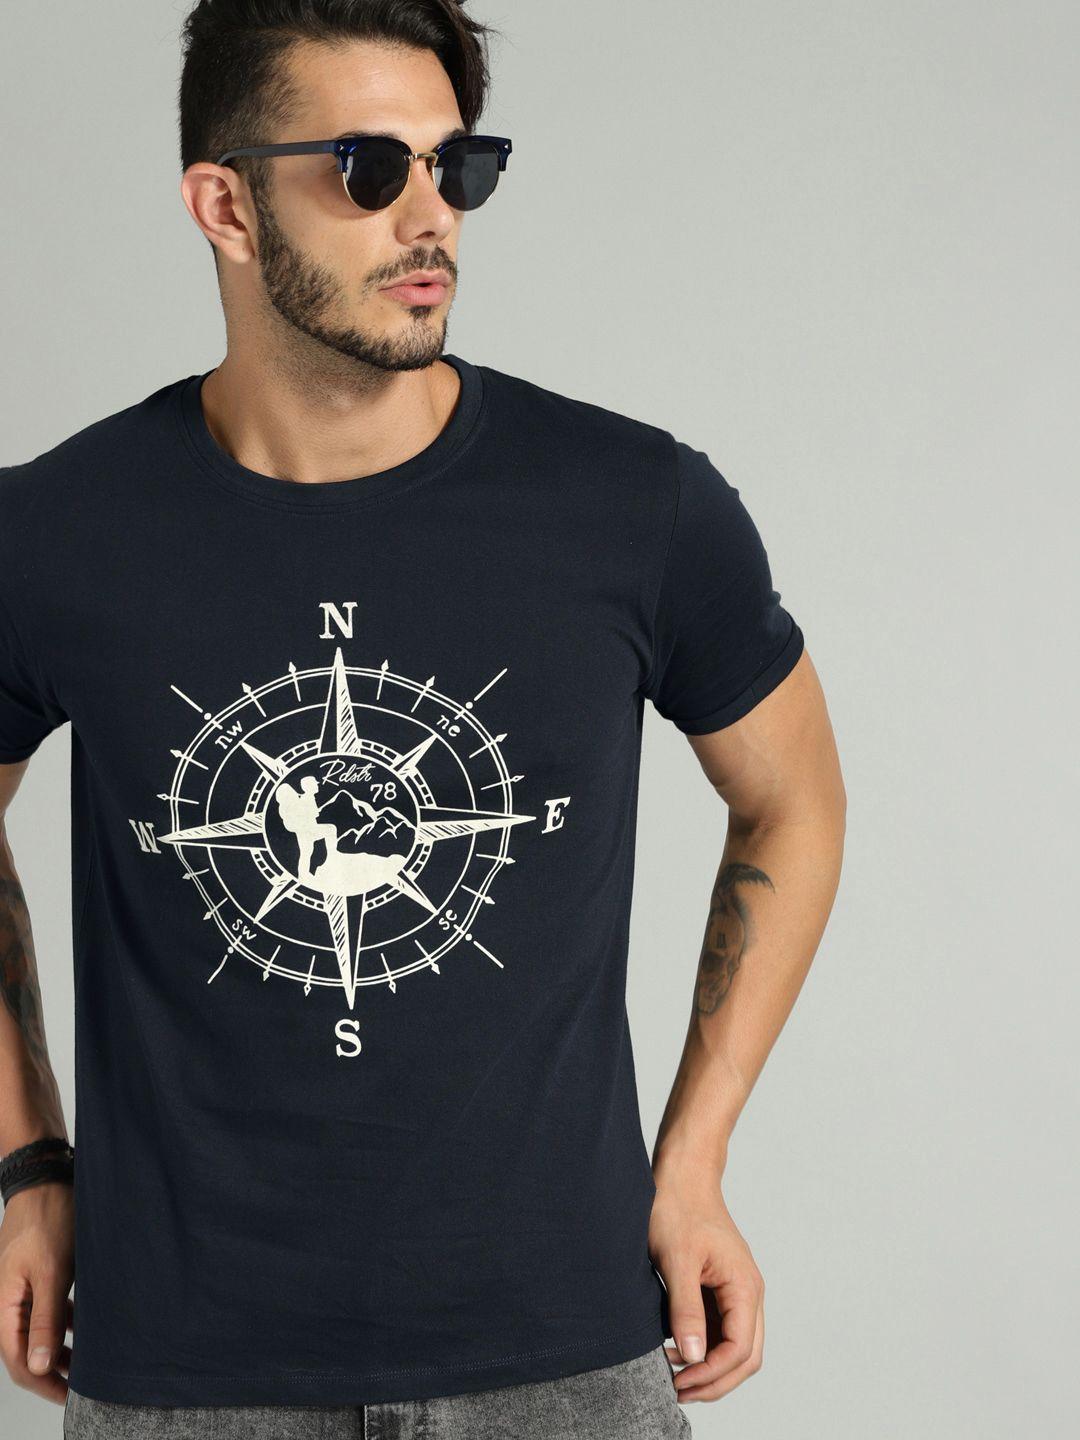 roadster-men-navy-blue-printed-round-neck-pure-cotton-t-shirt